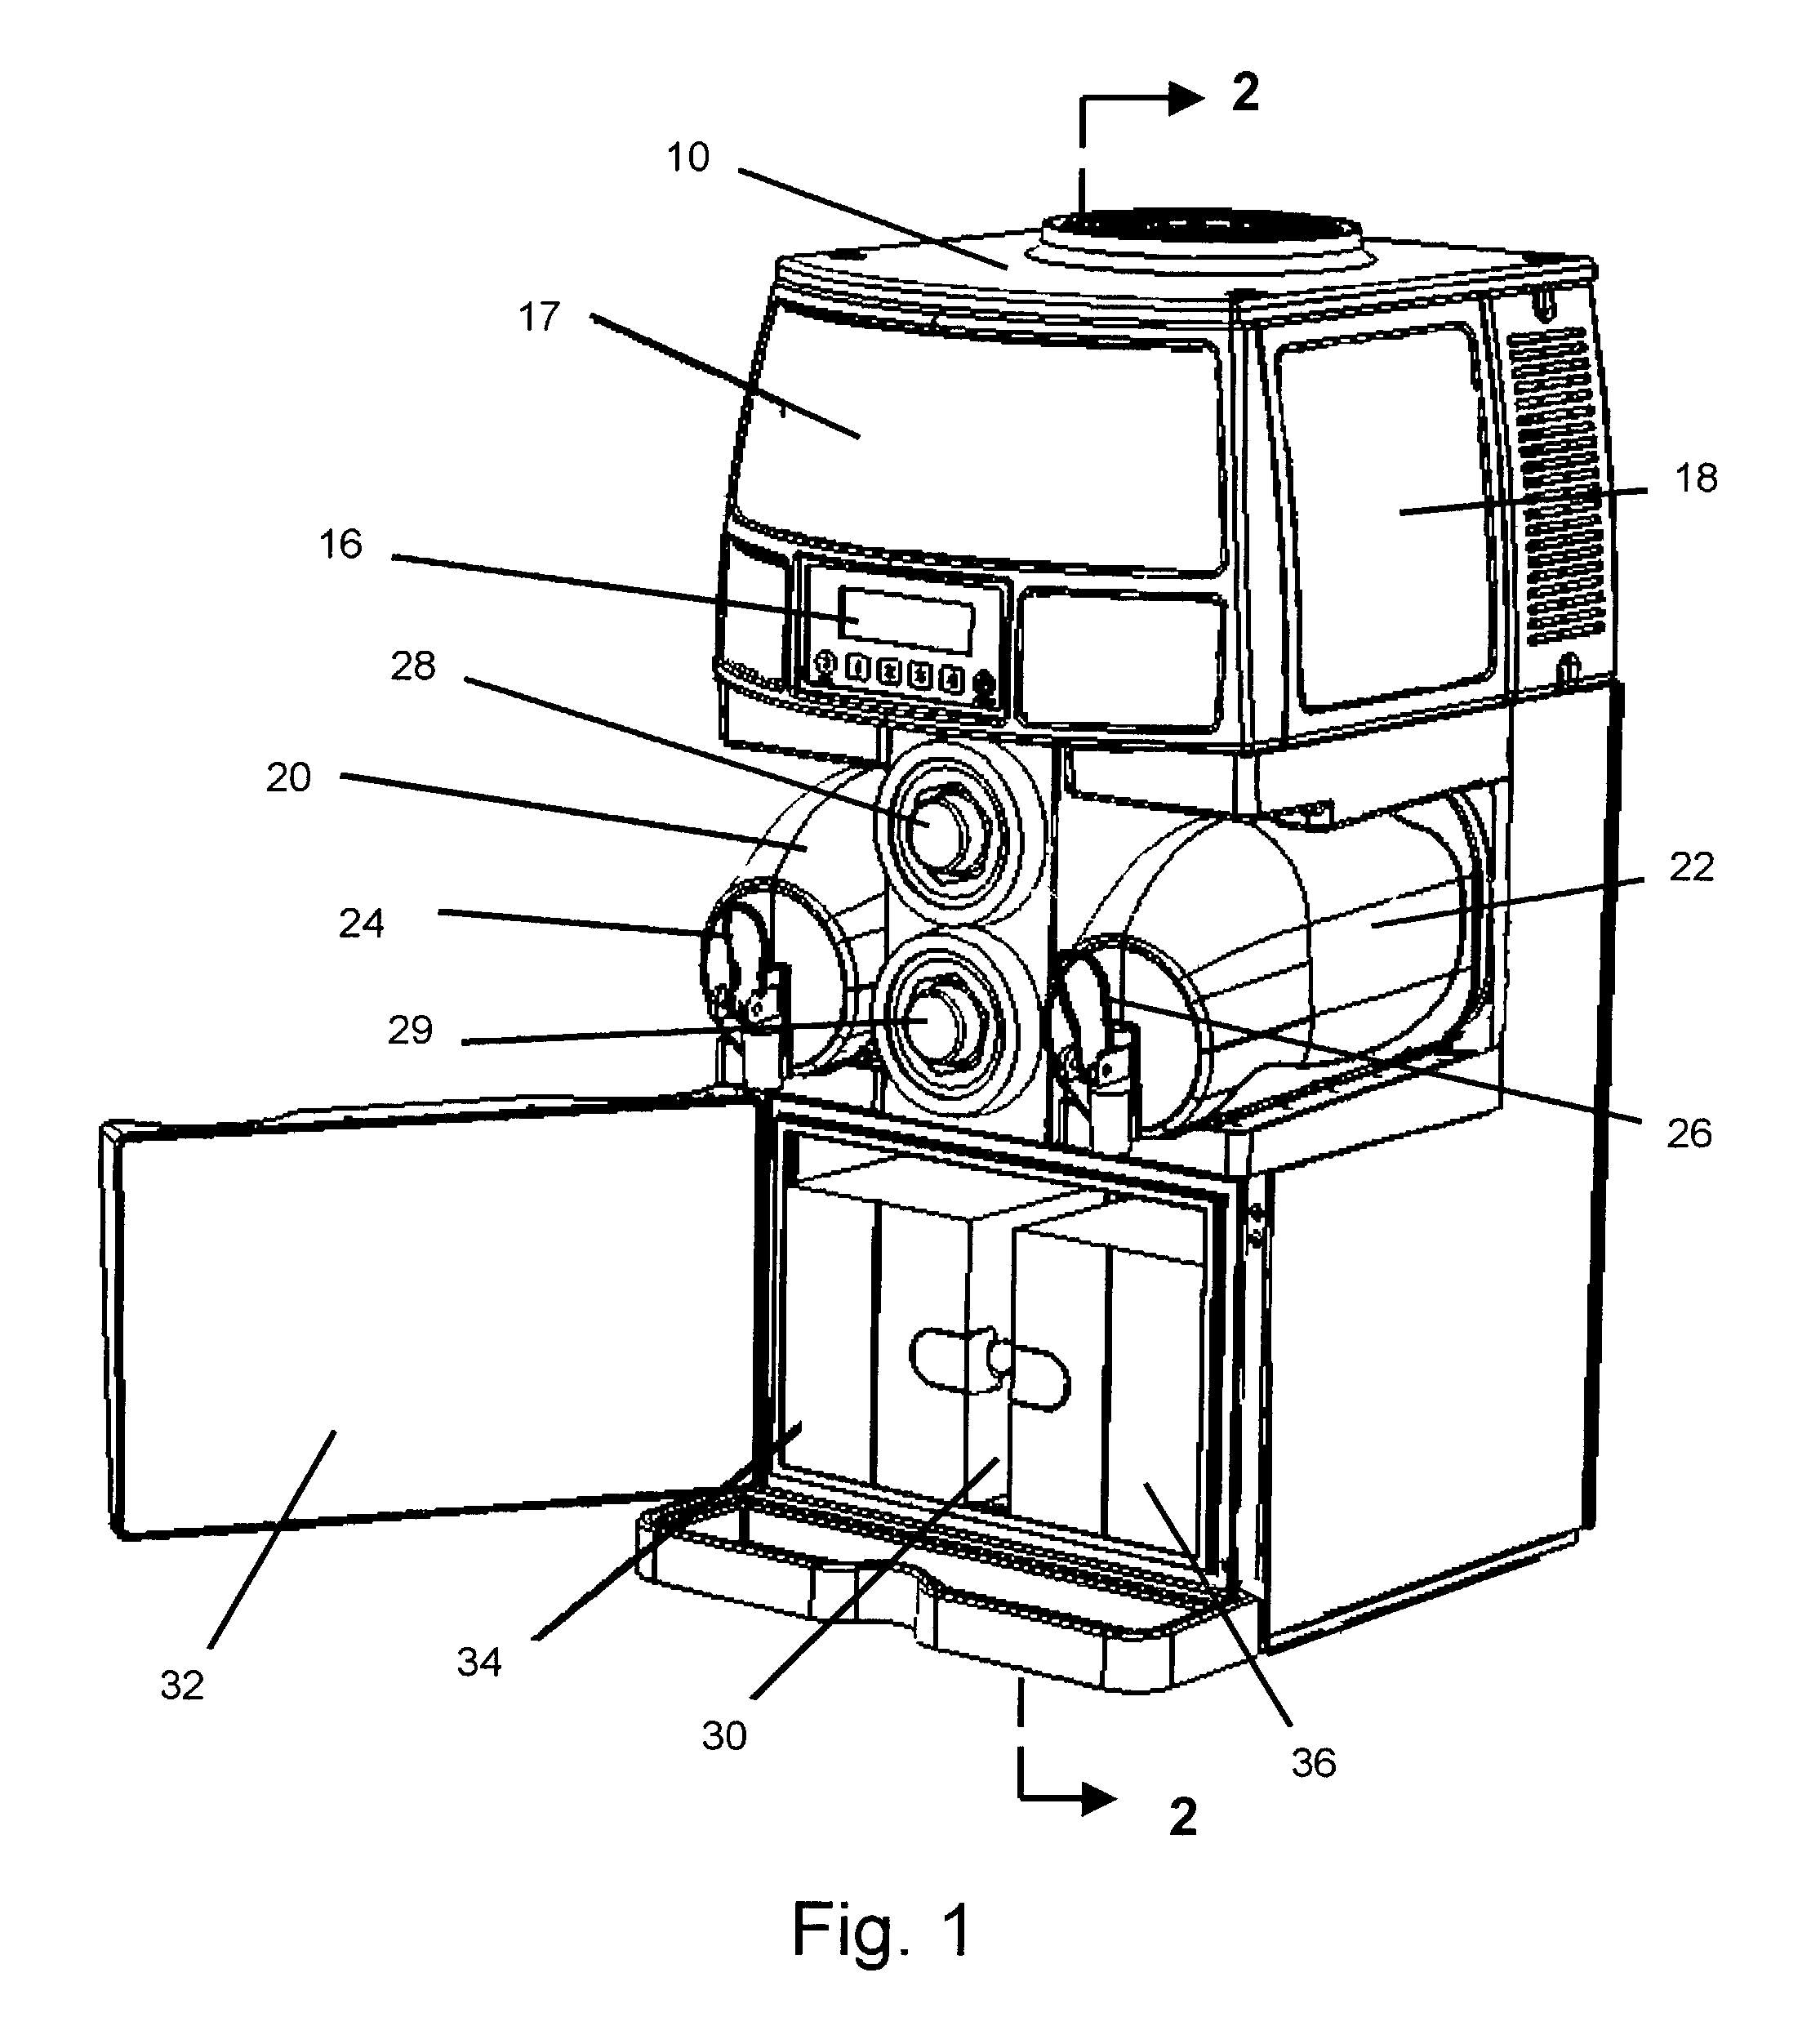 Method and apparatus to control a beverage or dessert dispenser